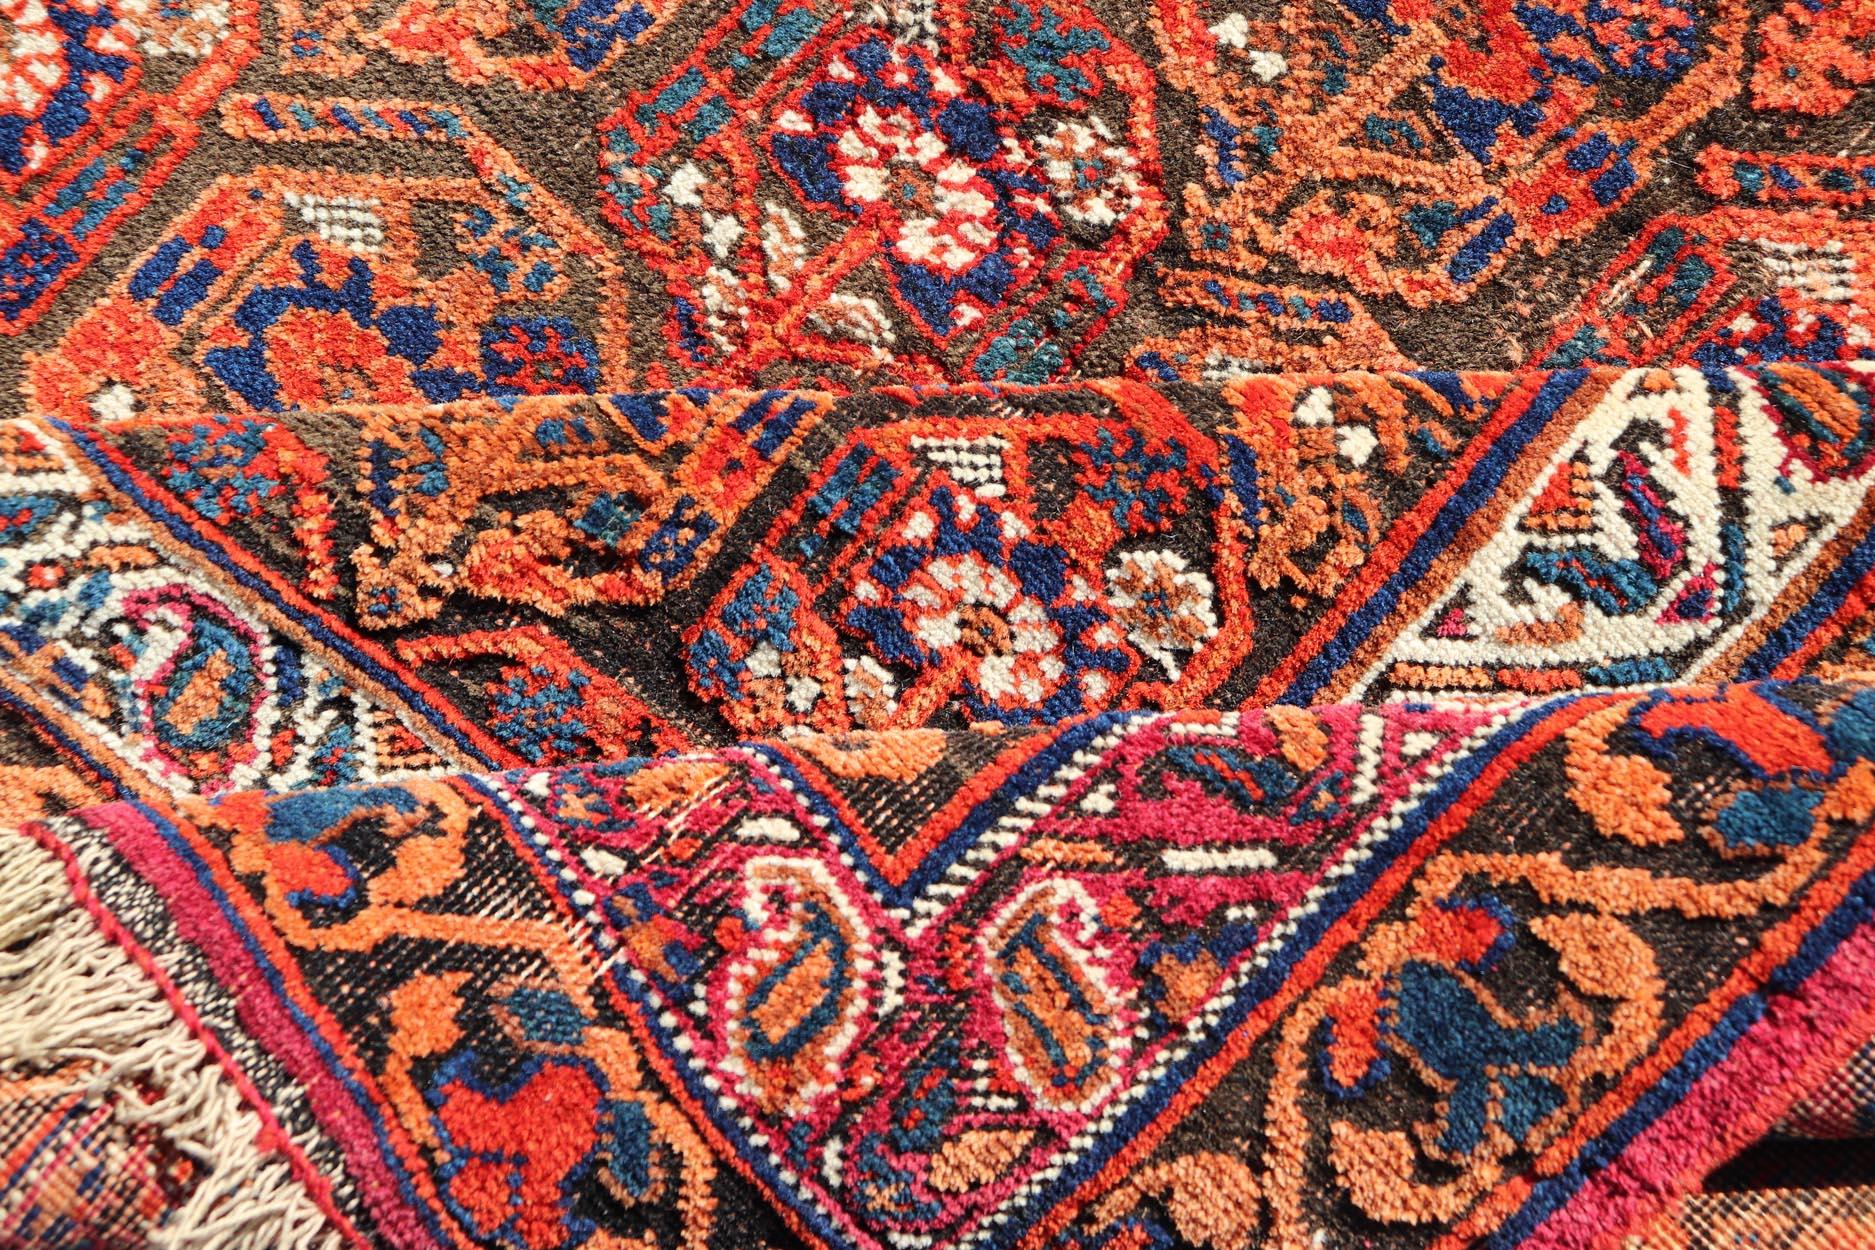  Fine Persian Antique Afshar Rug in Orange and Copper Background & Multi Colors For Sale 4